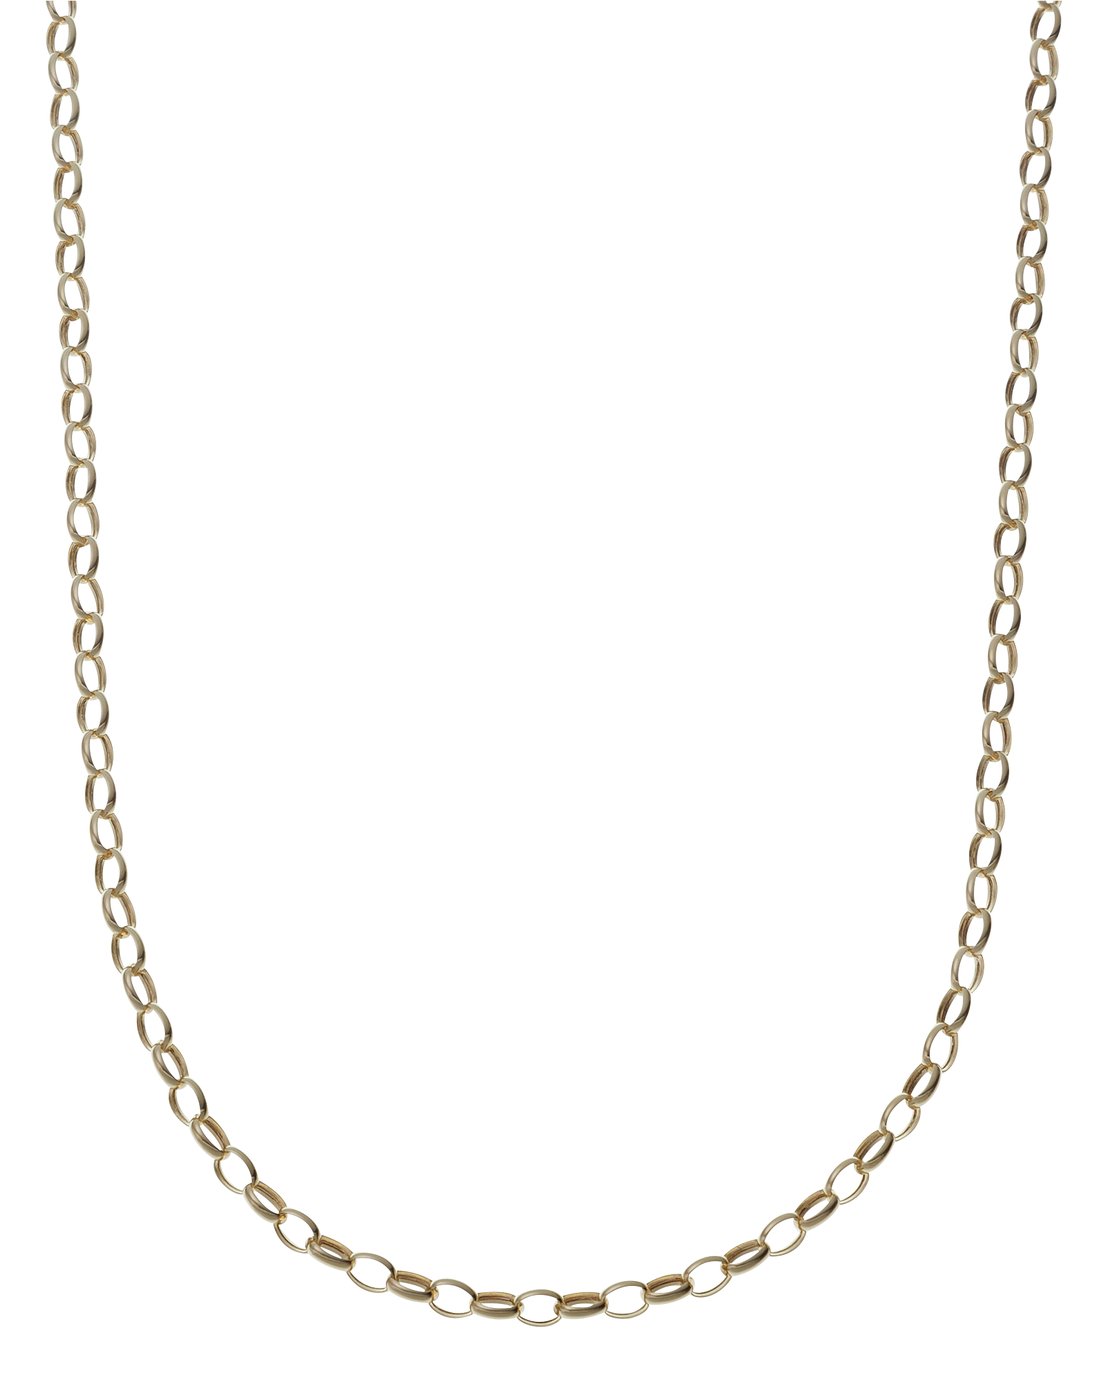 Revere 9ct Gold Oval Belcher Chain - 20in